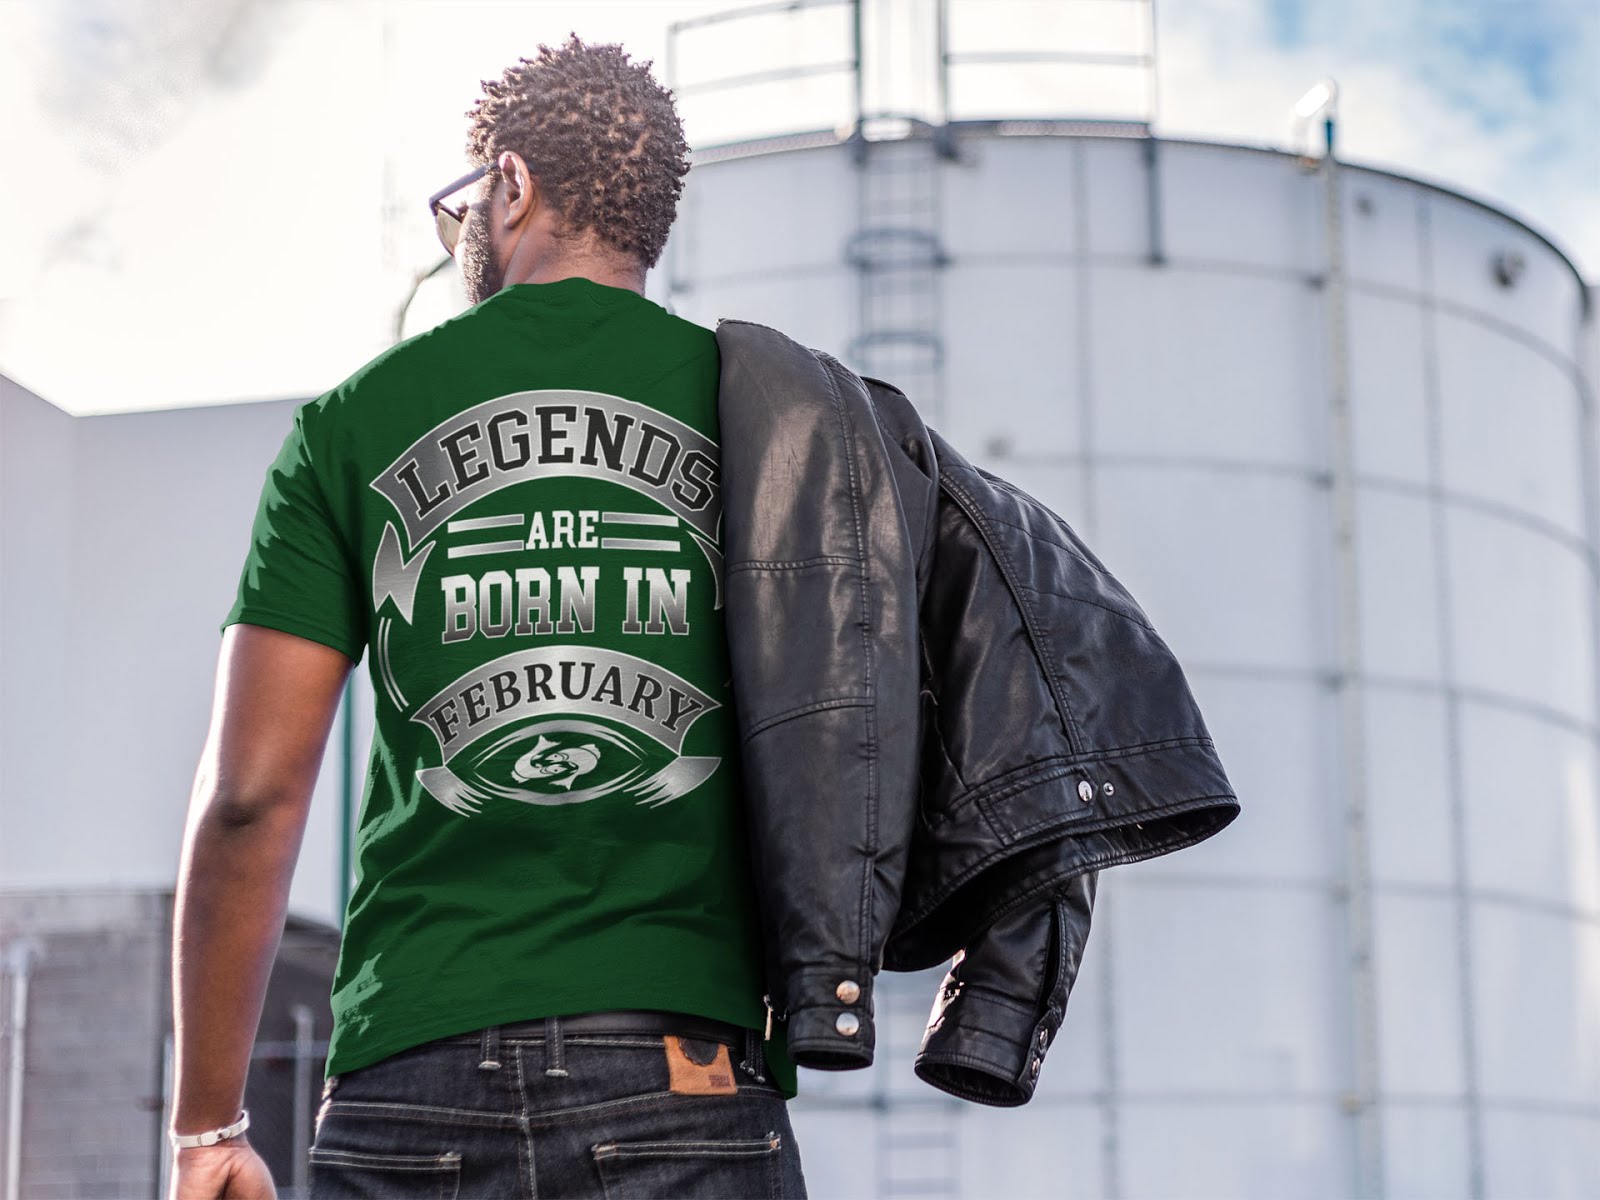 Legends are born in February T-Shirt